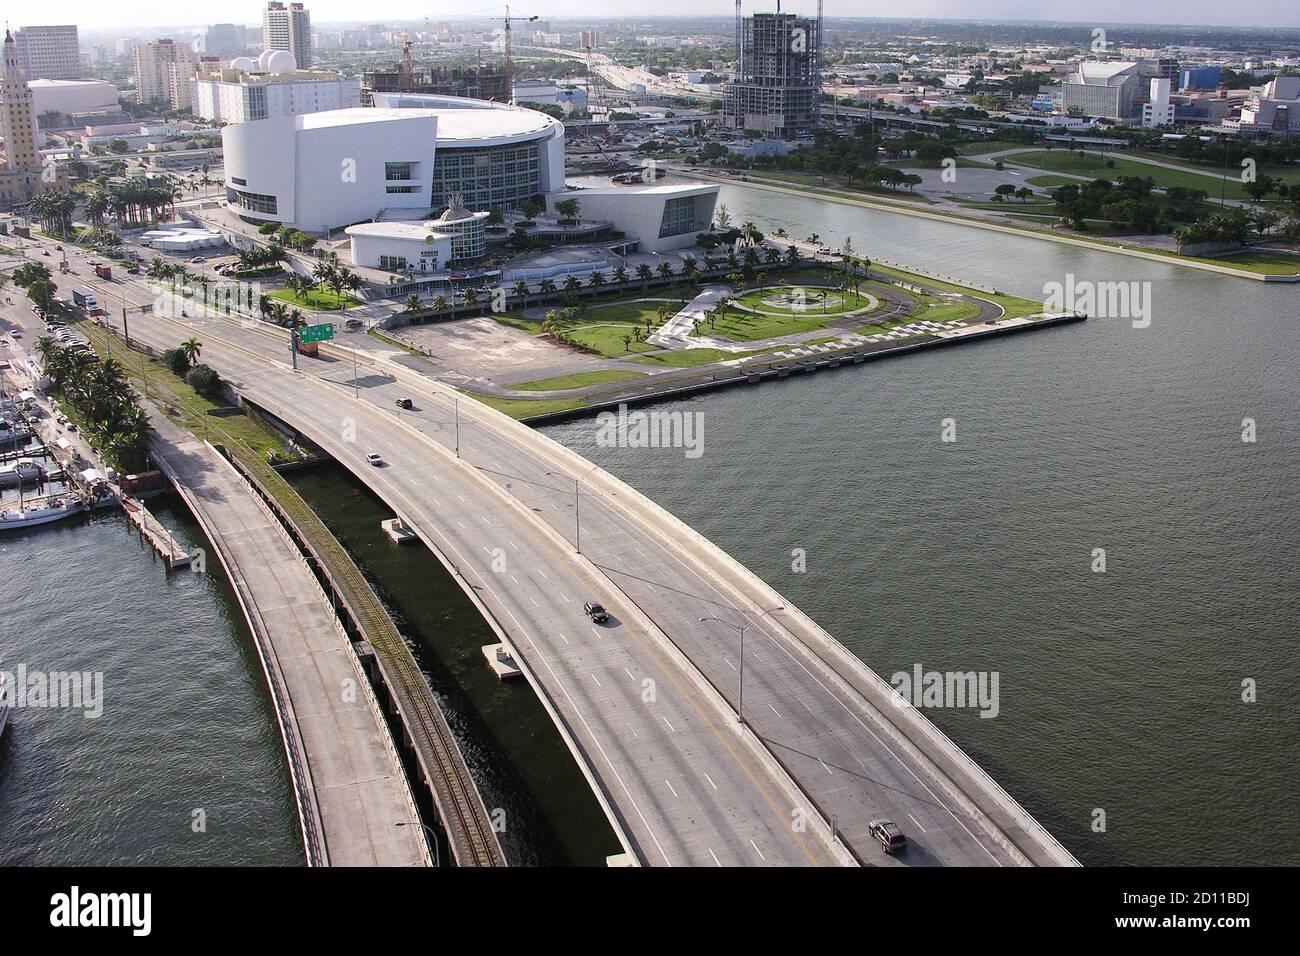 Archival September 2005 aerial view of Port Blvd causeway bridge and American Airlines Arena in downtown Miami, Florida, USA. Stock Photo